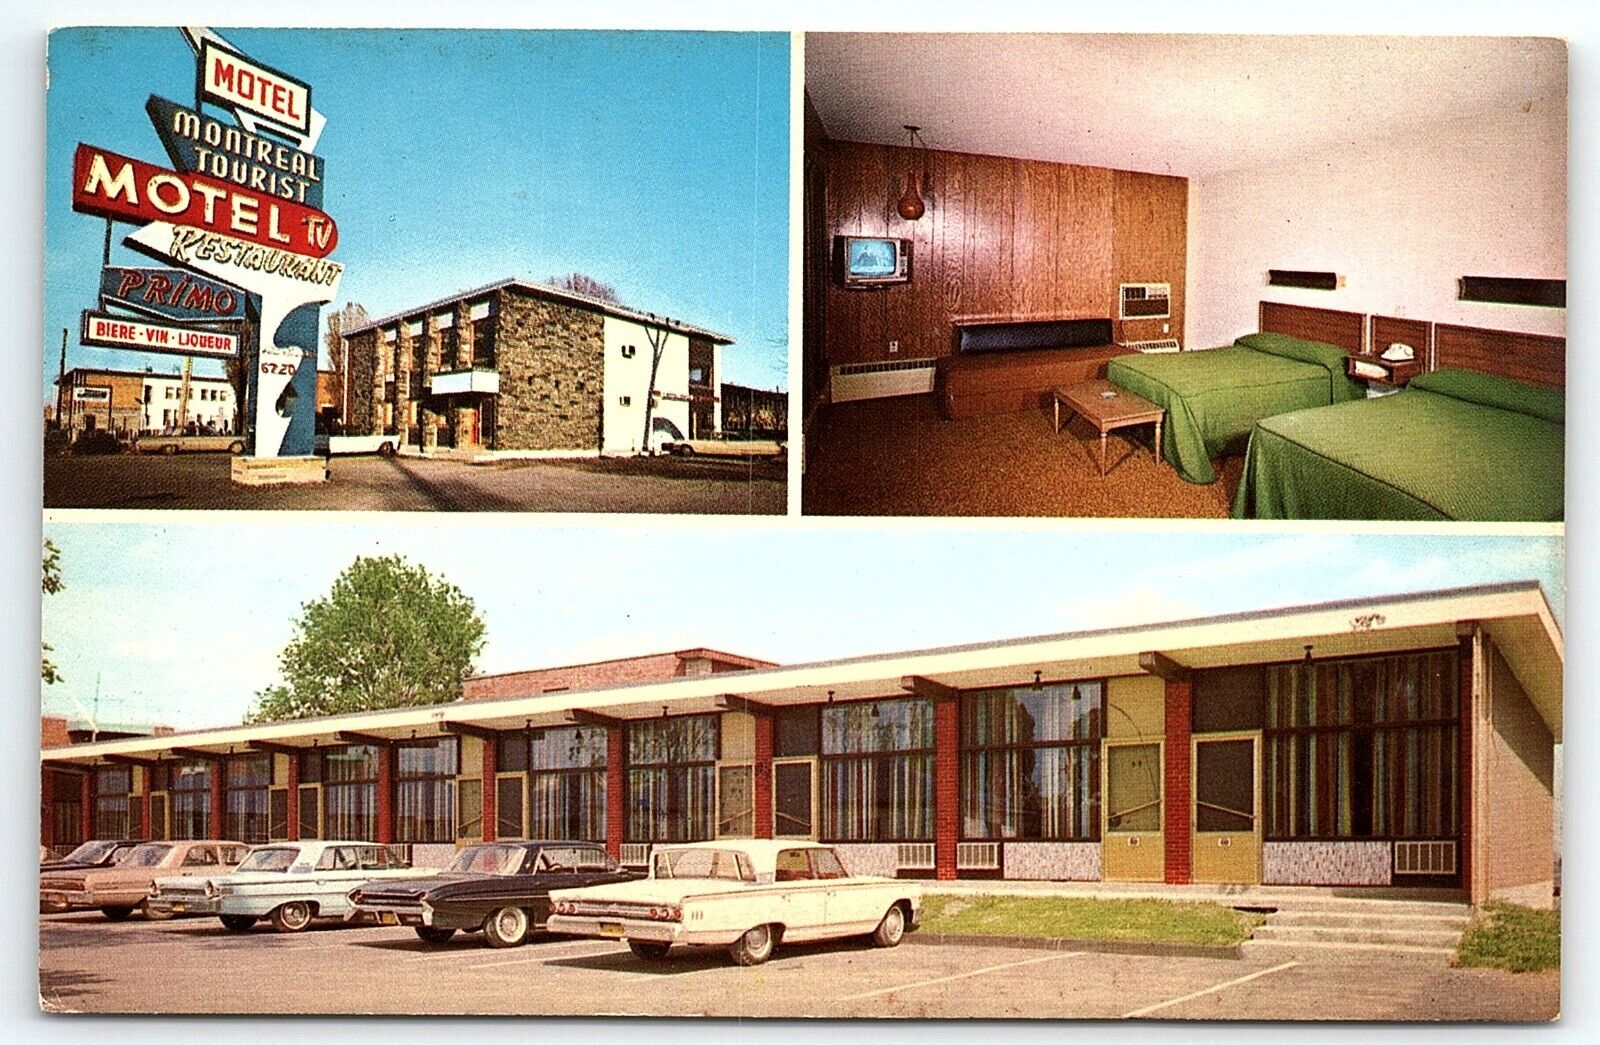 1960s MONTREAL TOURIST MOTEL RESTAURANT OLD CARD TV ON IN ROOM POSTCARD P417